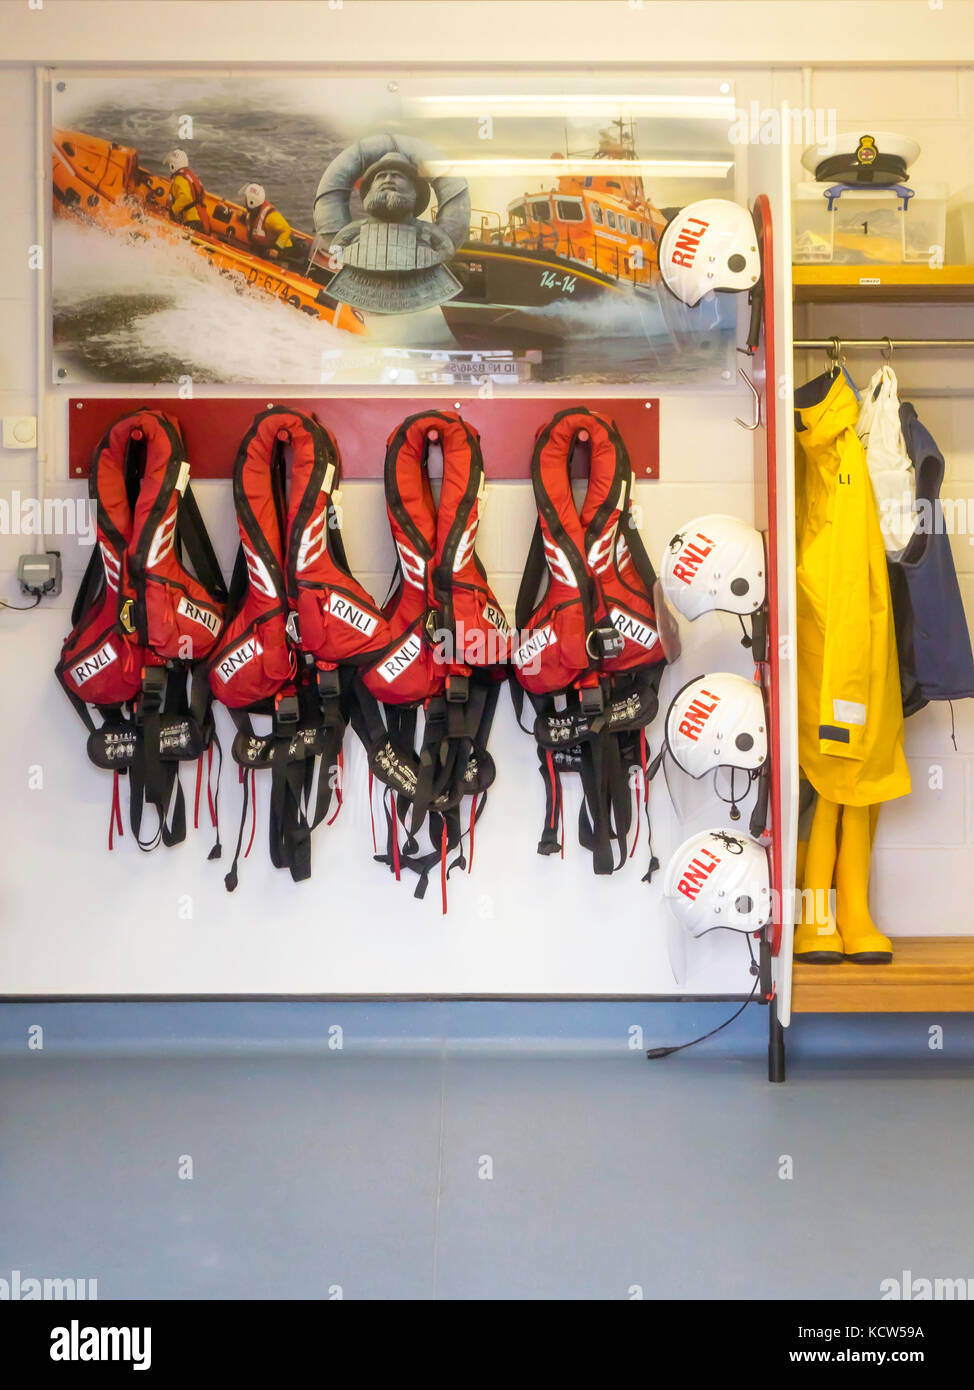 RNLI Whitby Lifebouat Station, crew life jackets and waterproof clothing hanging ready for immediate use Stock Photo